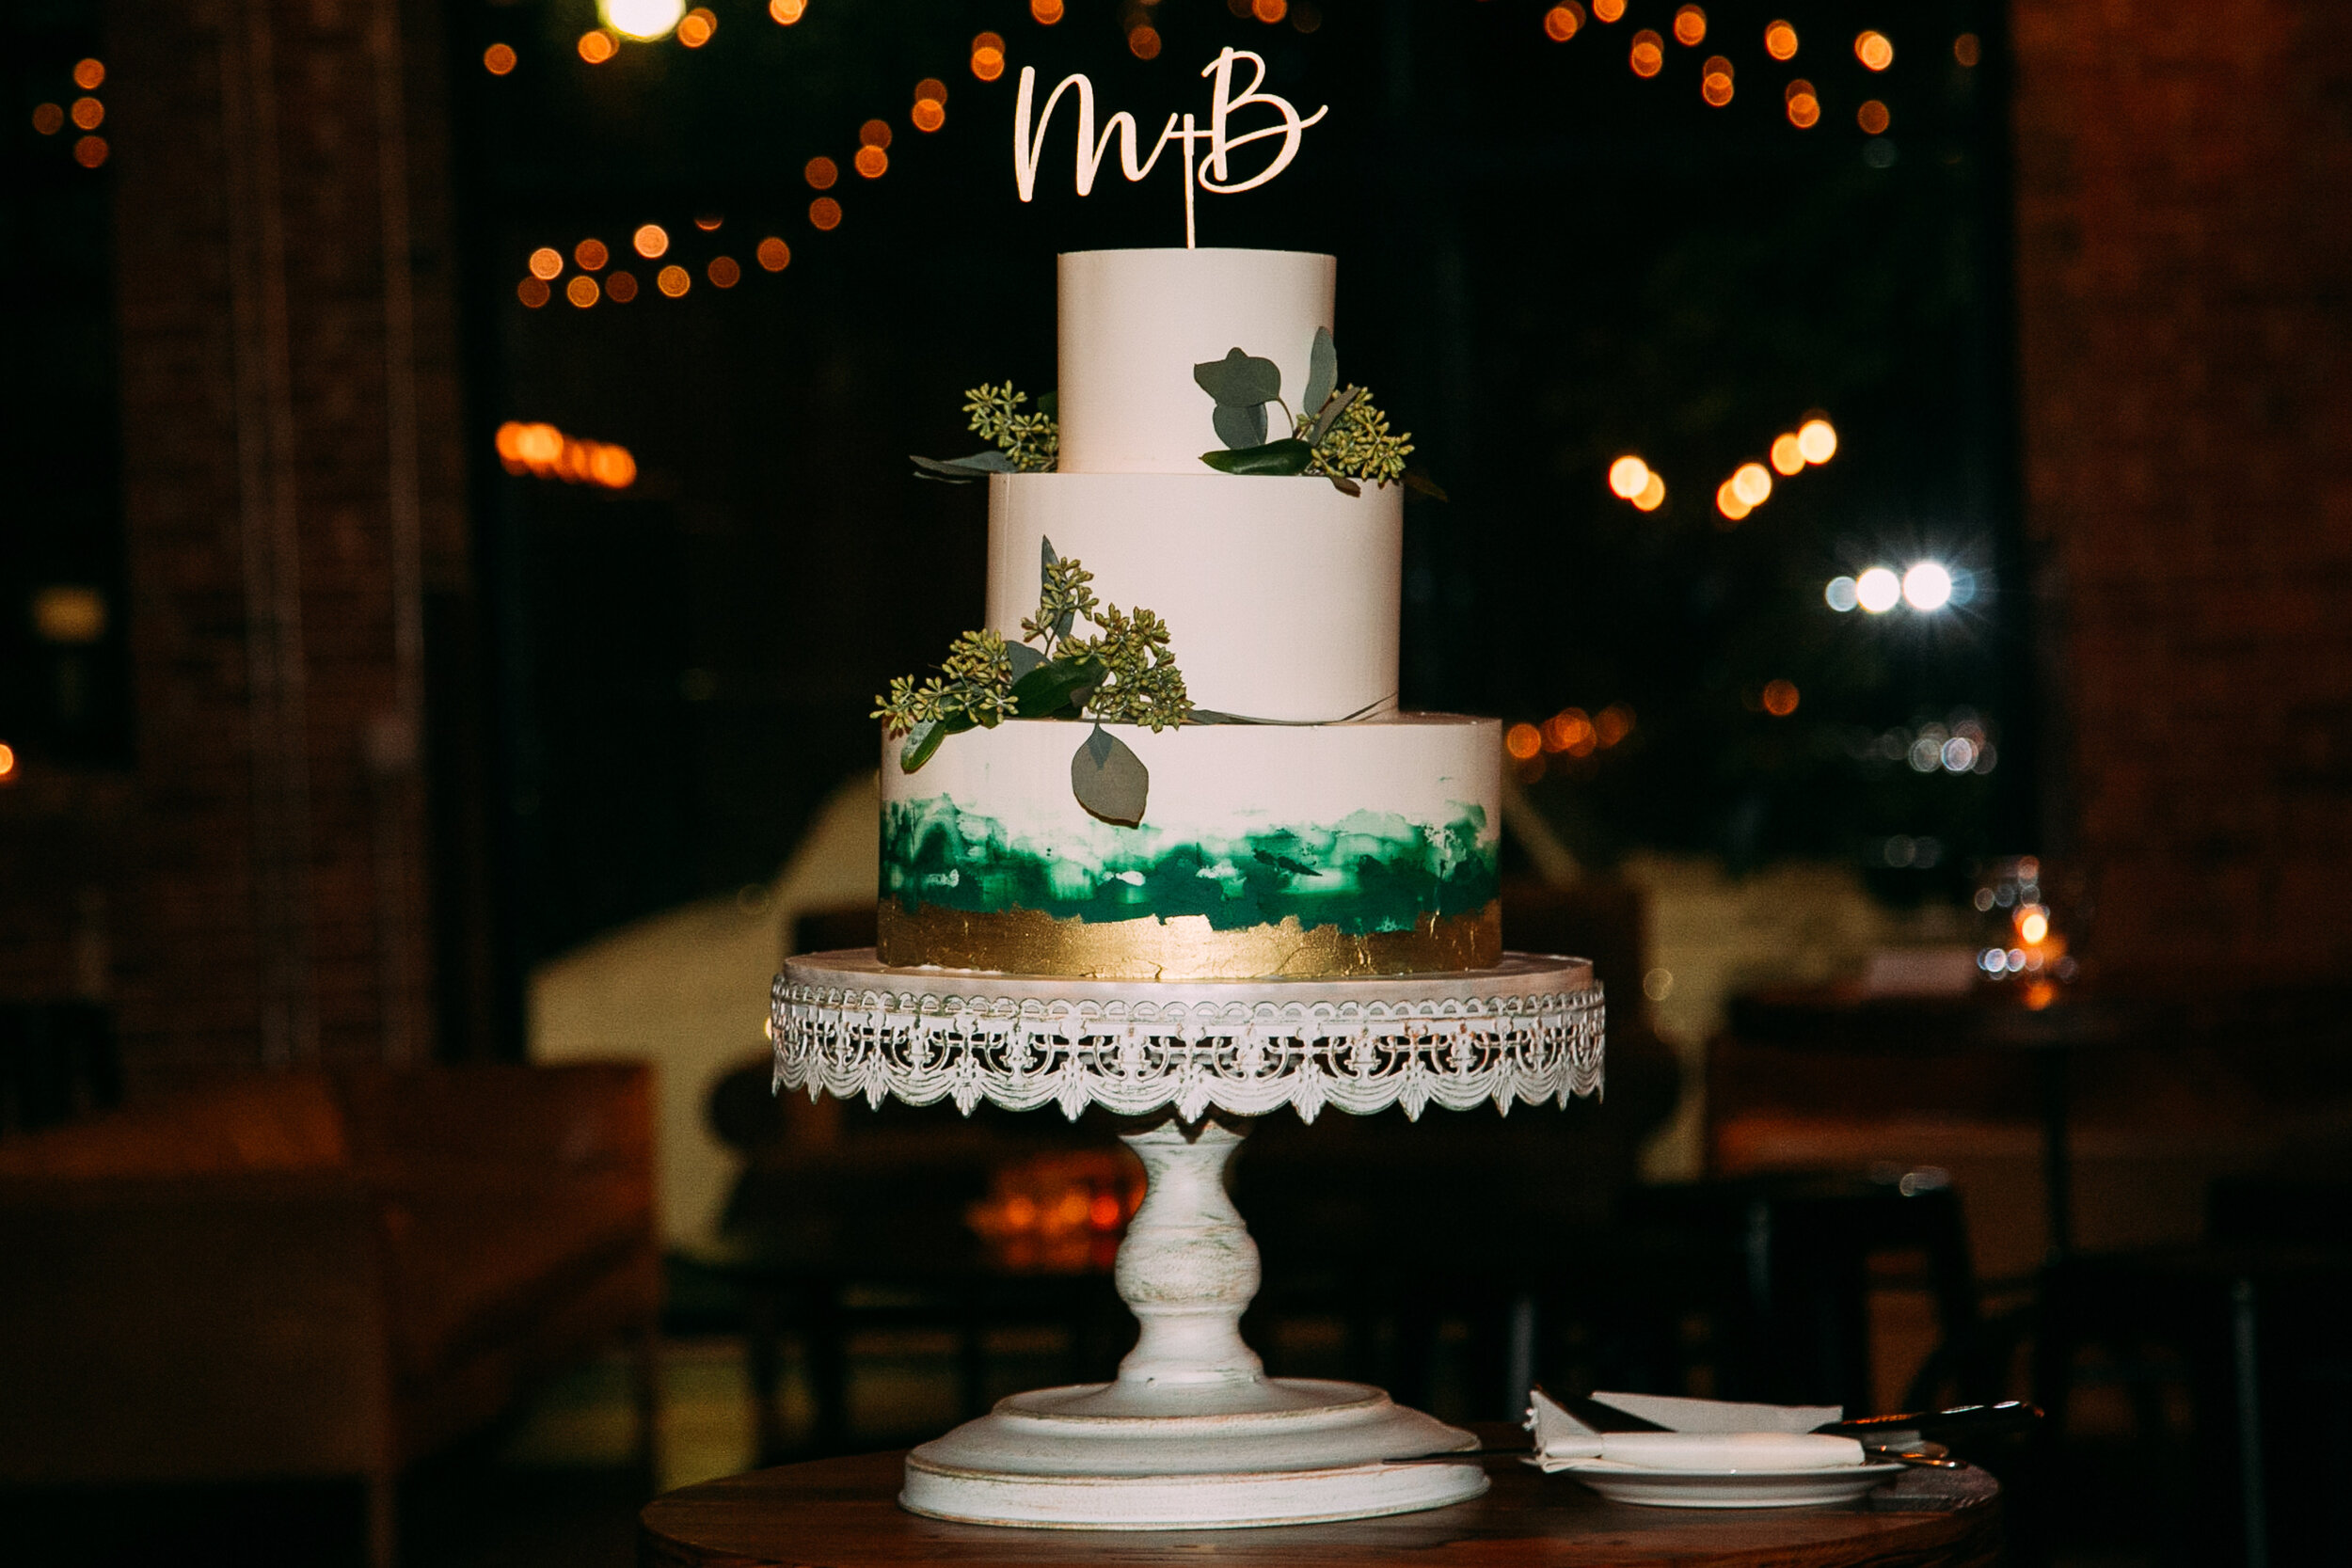 Modern wedding cake design: Modern Chicago wedding at Ovation captured by This Is Feeling Photography. Find more Chicago wedding inspiration at CHItheeWED.com!